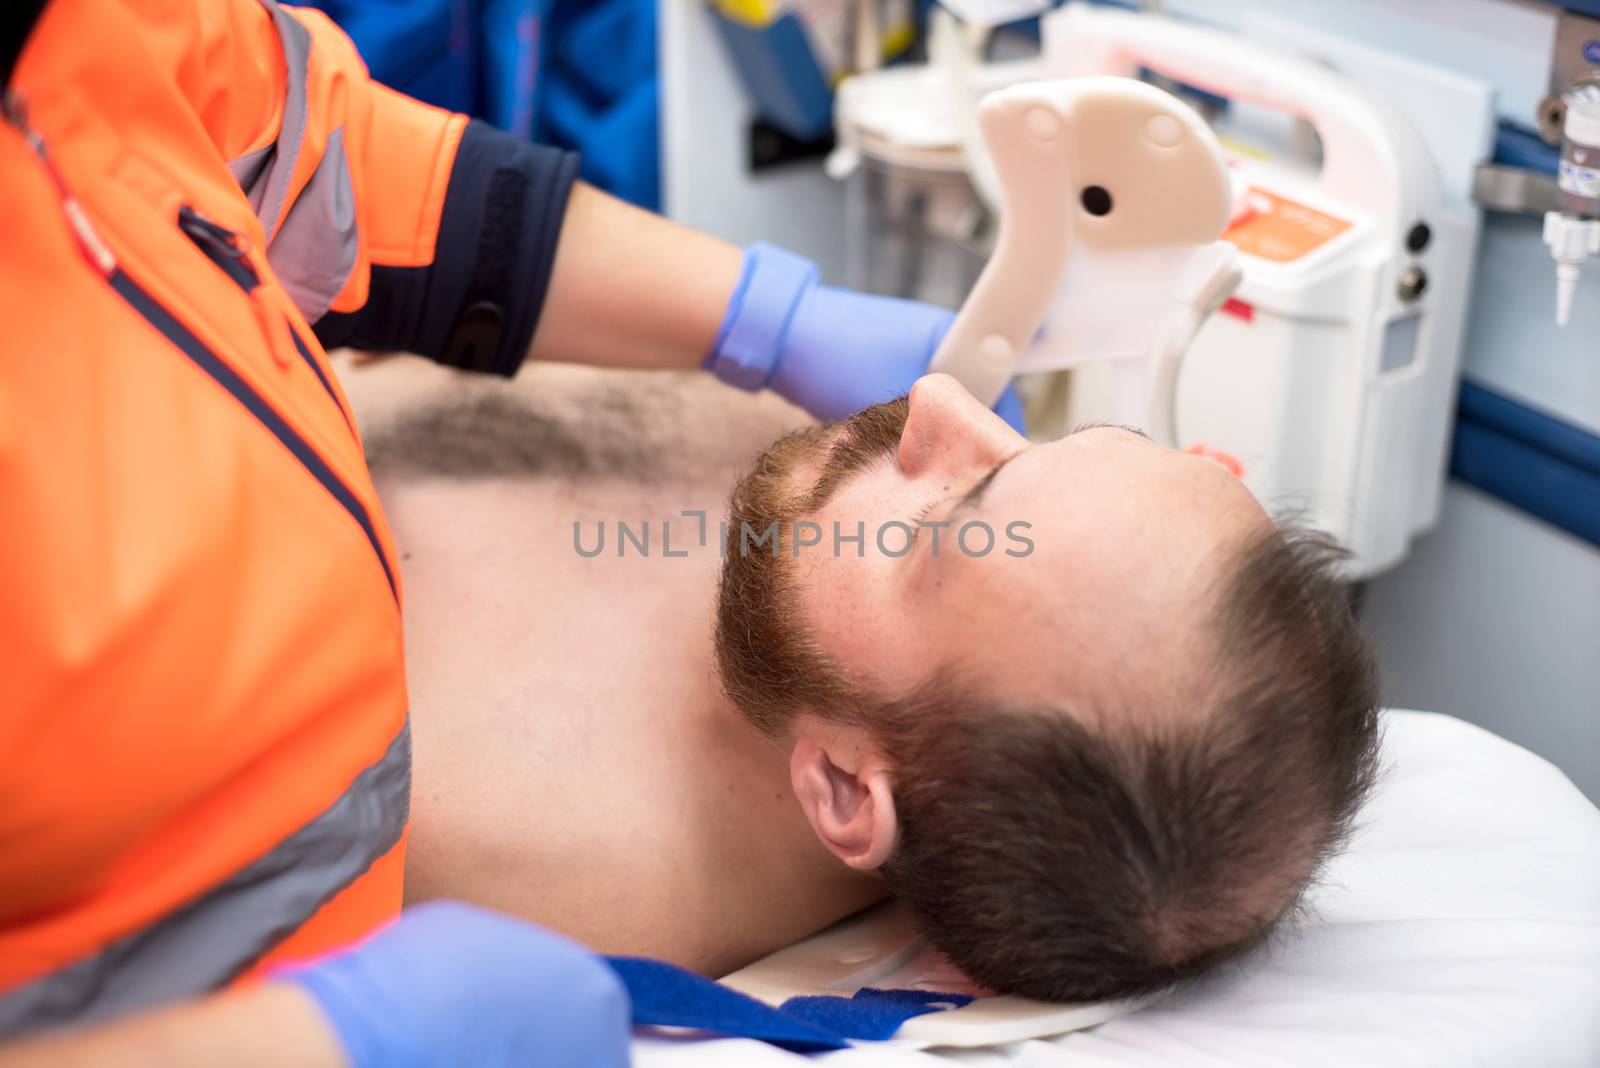 Emergency doctor putting a cervical collar to a patient in the ambulance